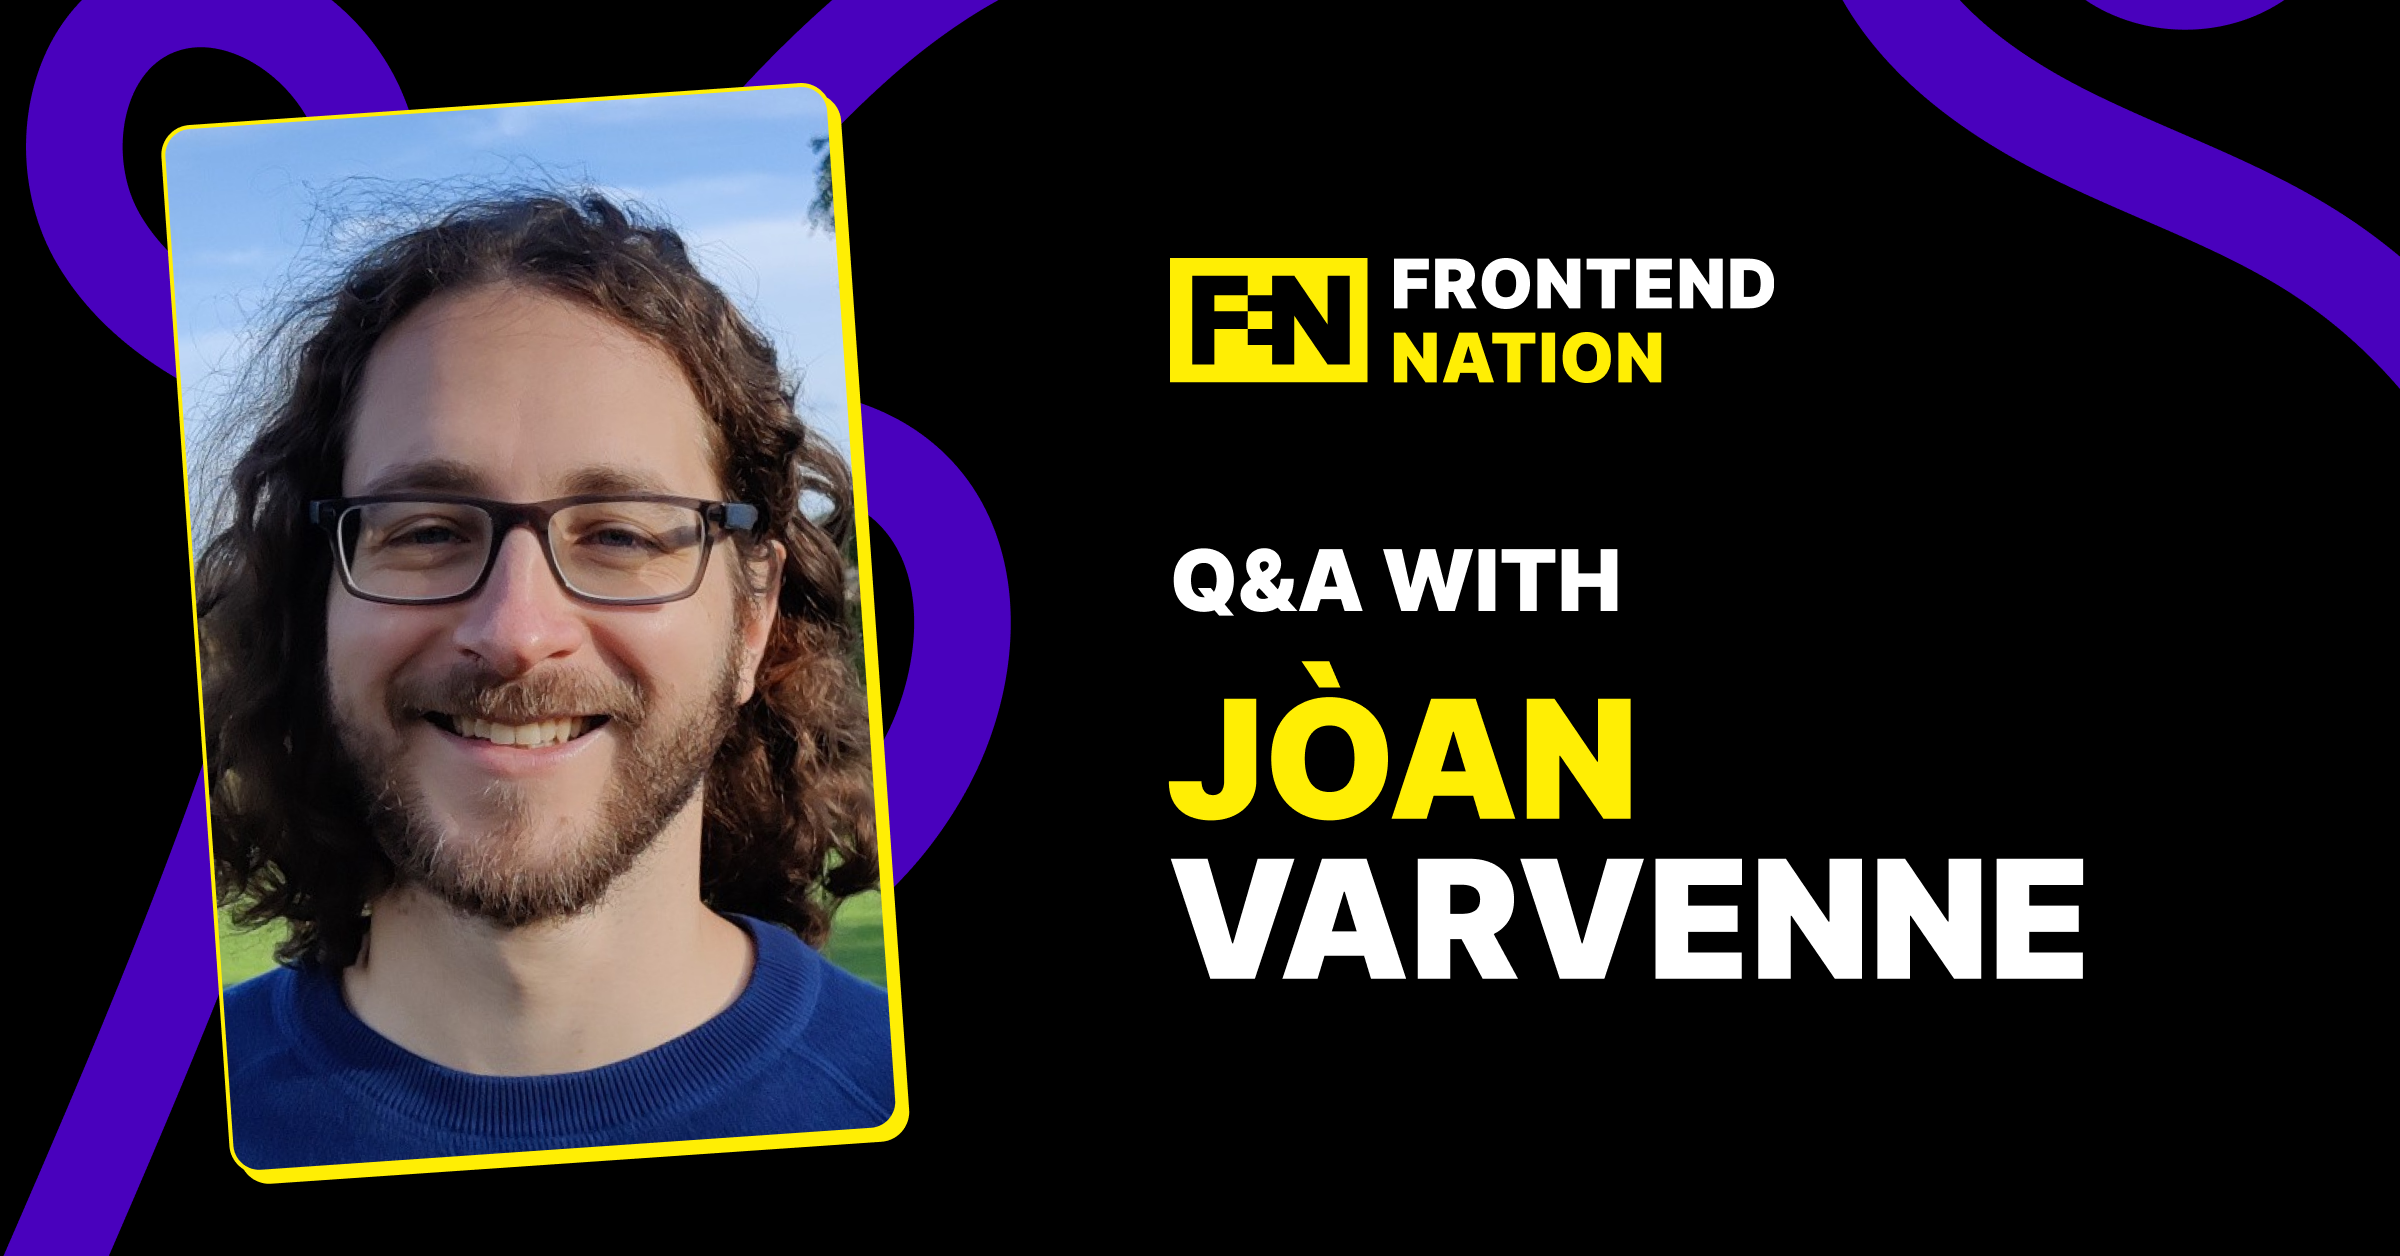 Beyond Docker: WebContainers and the Future of Web Dev (Interview with Jòan Varvenne)